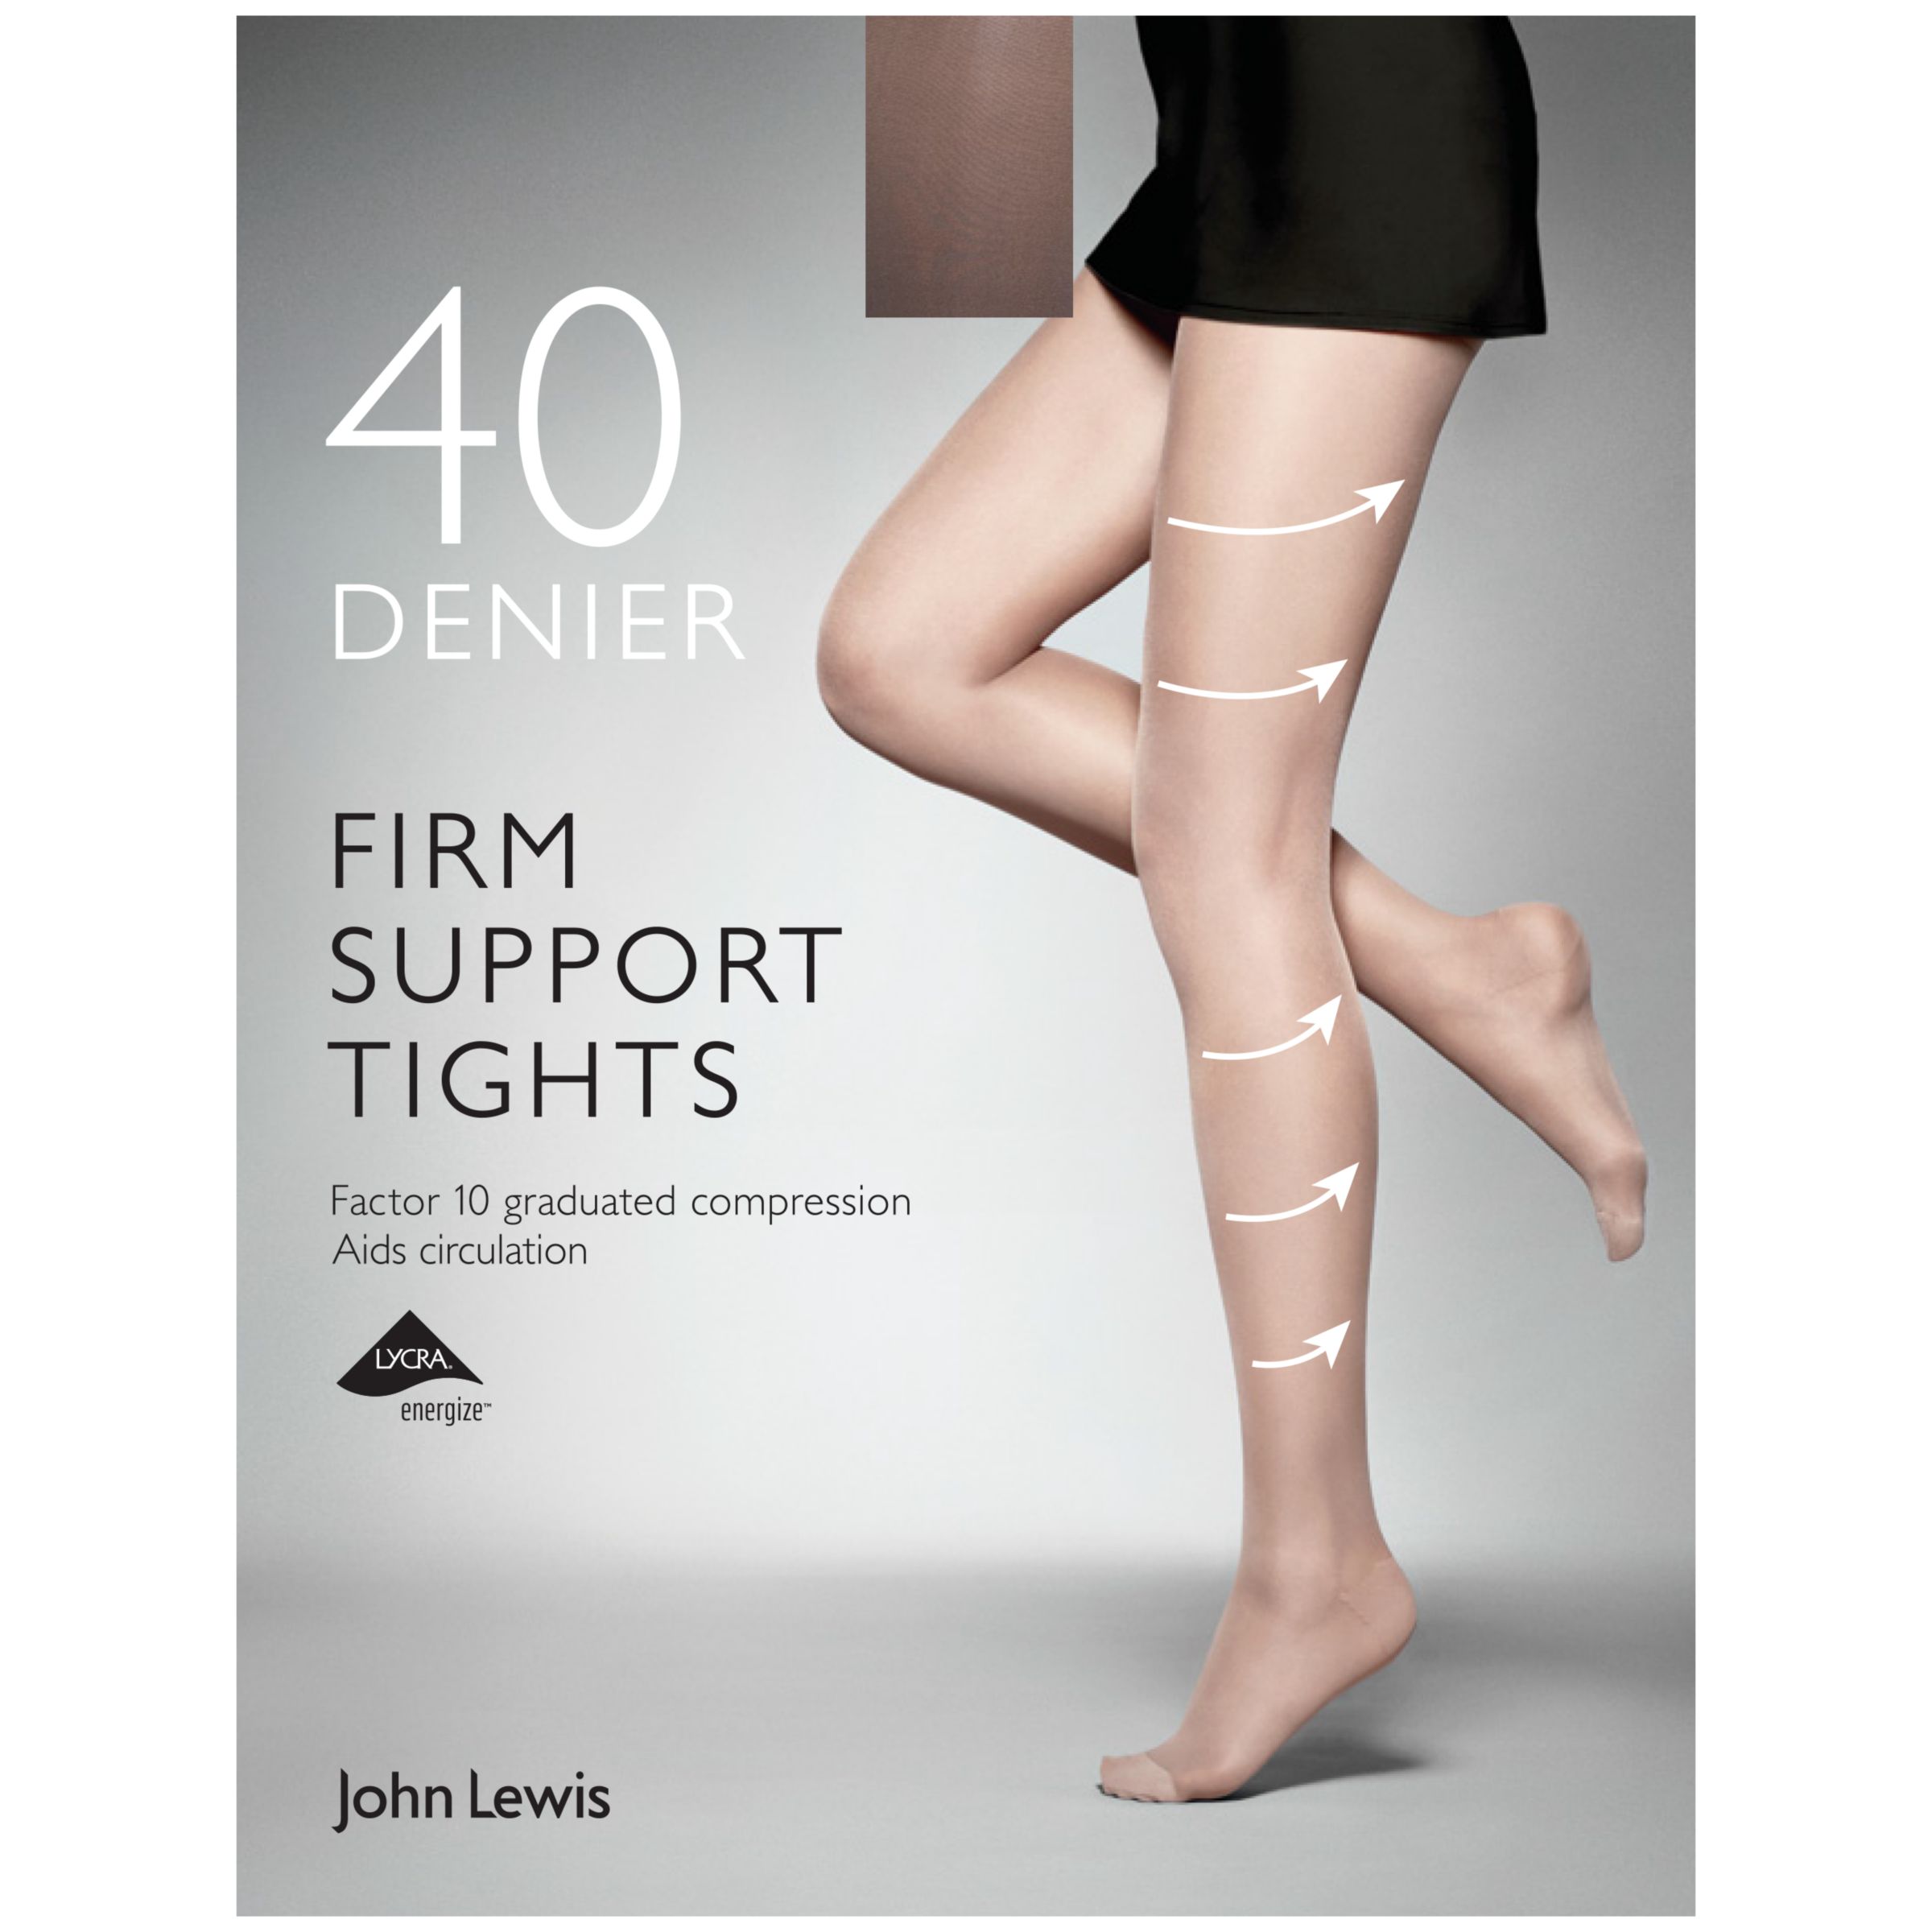 John Lewis 40 Denier Firm Support Tights, Nearly Black, XL